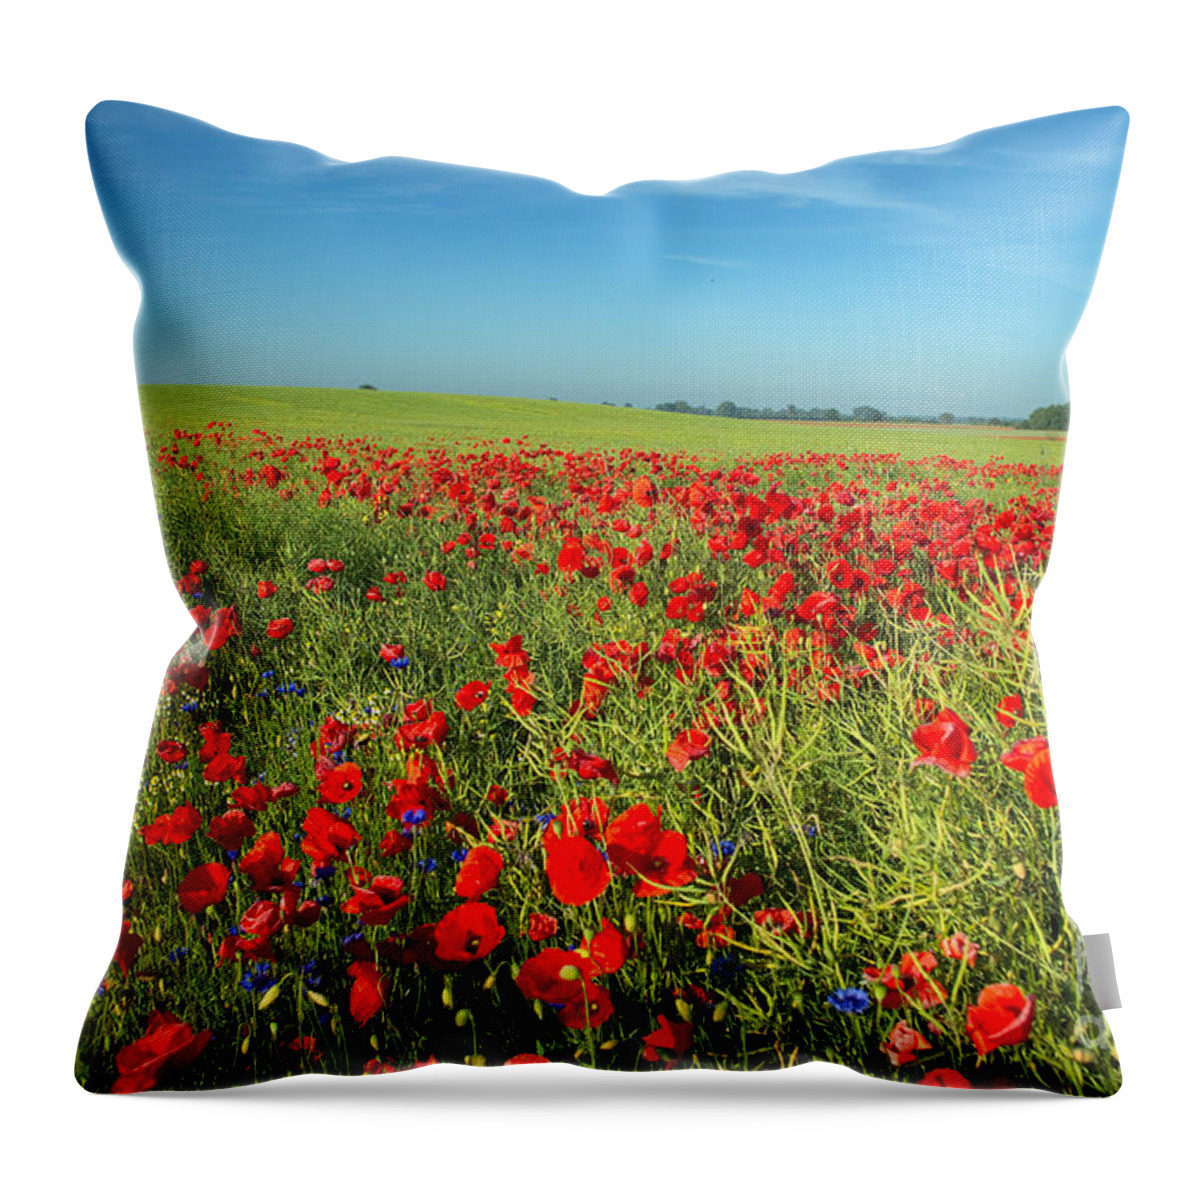 Corn Poppy Throw Pillow featuring the photograph Field Of Poppies Germany by Helmut Pieper